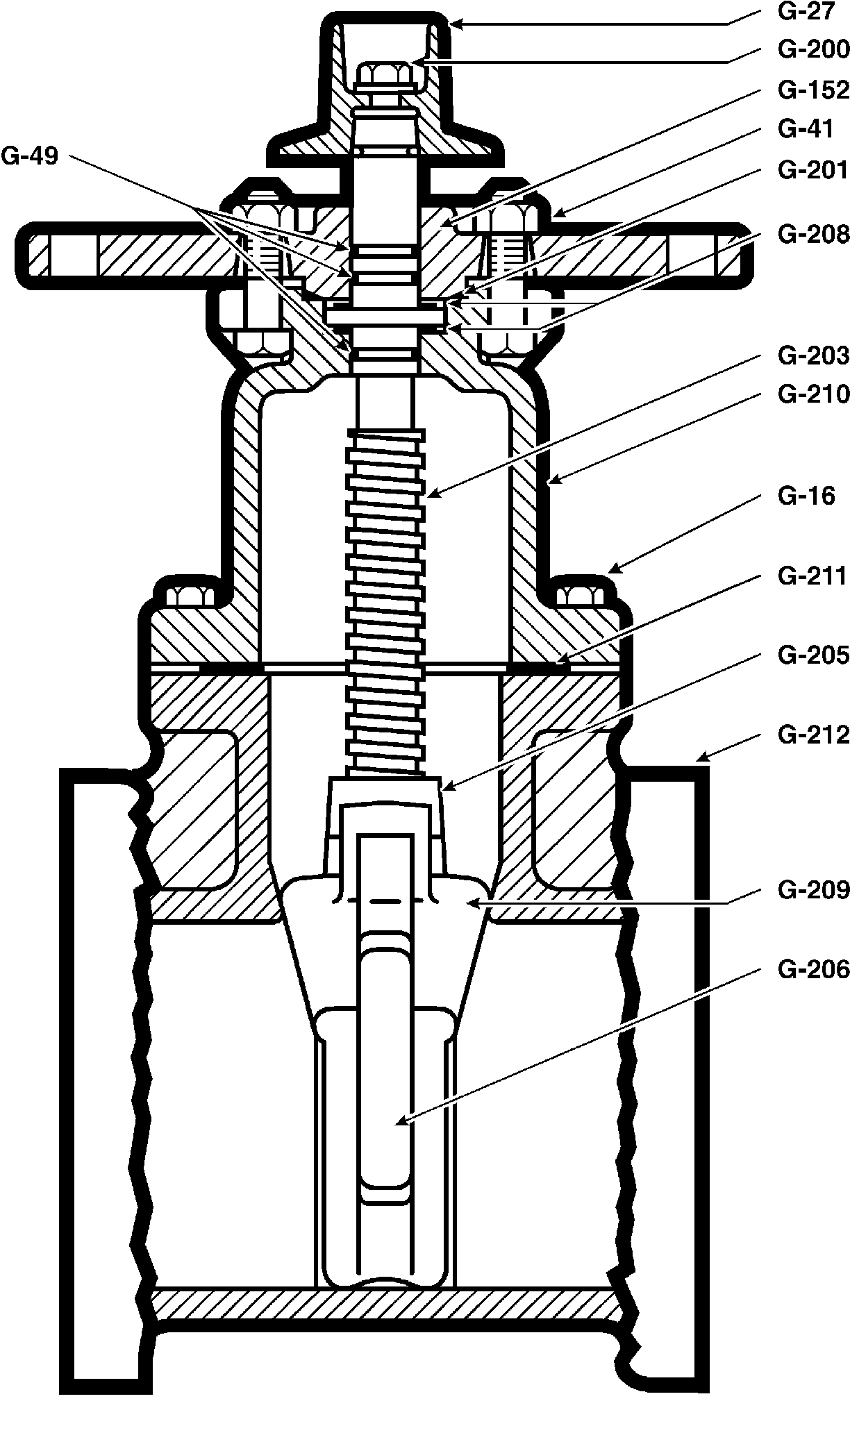 P-USP1-16 FLxMJ 4-12in Parts Drawing